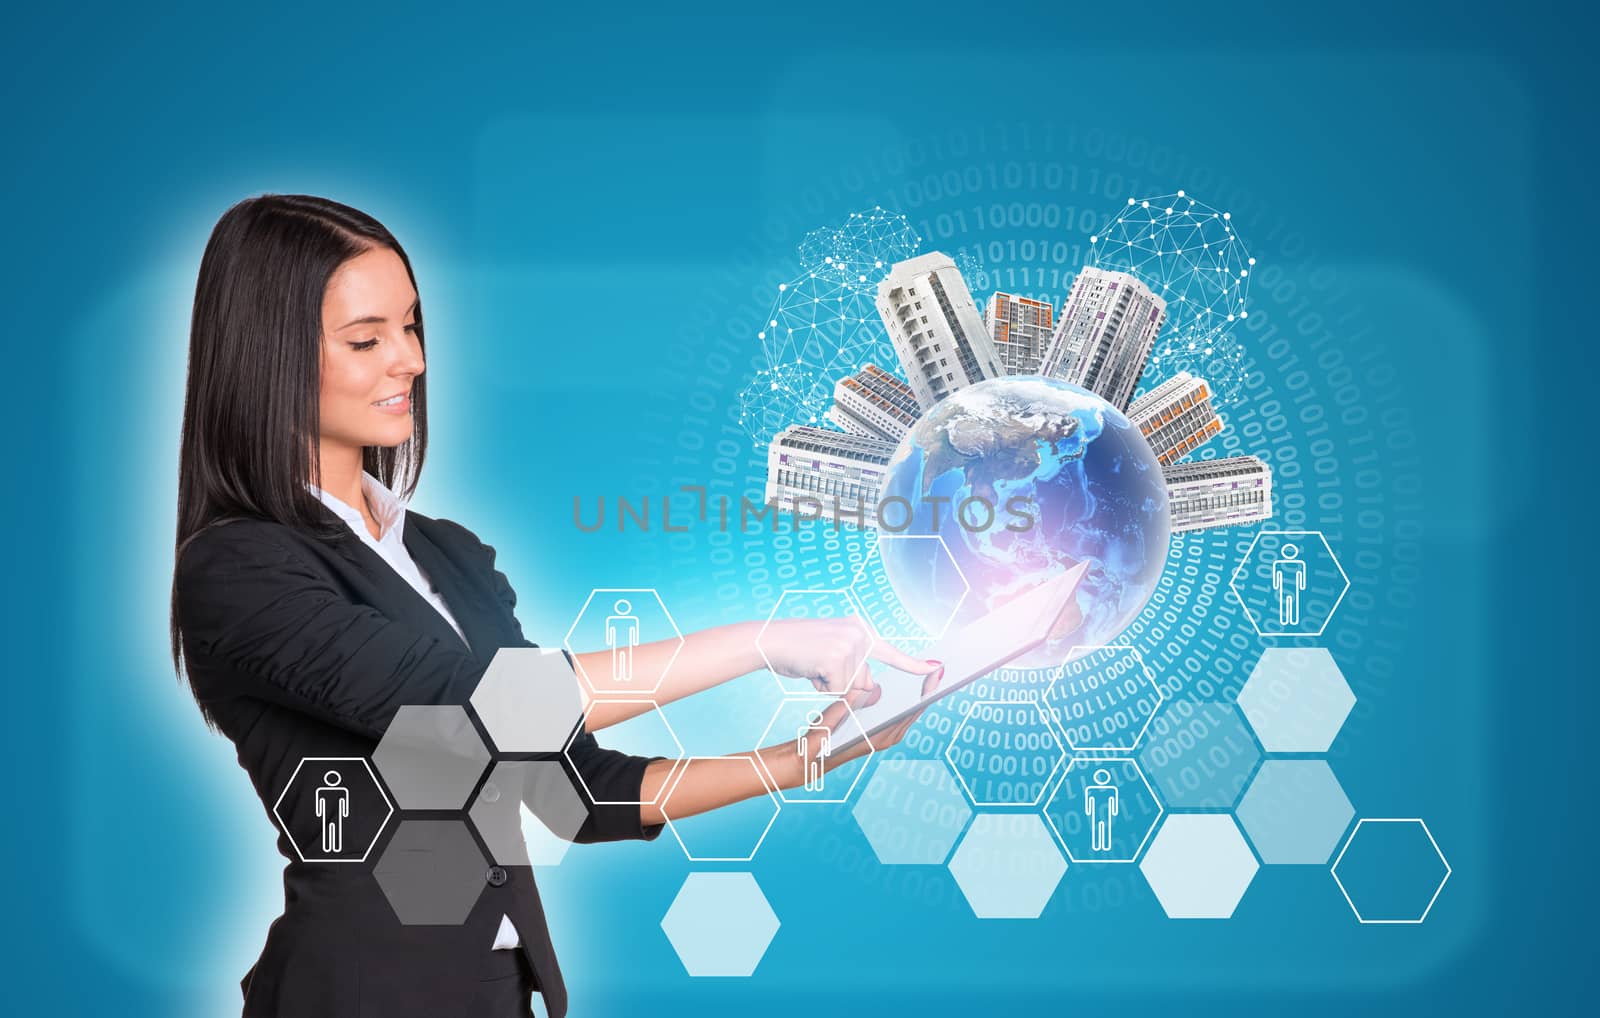 Beautiful businesswomen in suit using digital tablet. Earth with buildings. Hexagons and figures as backdrop. Element of this image furnished by NASA